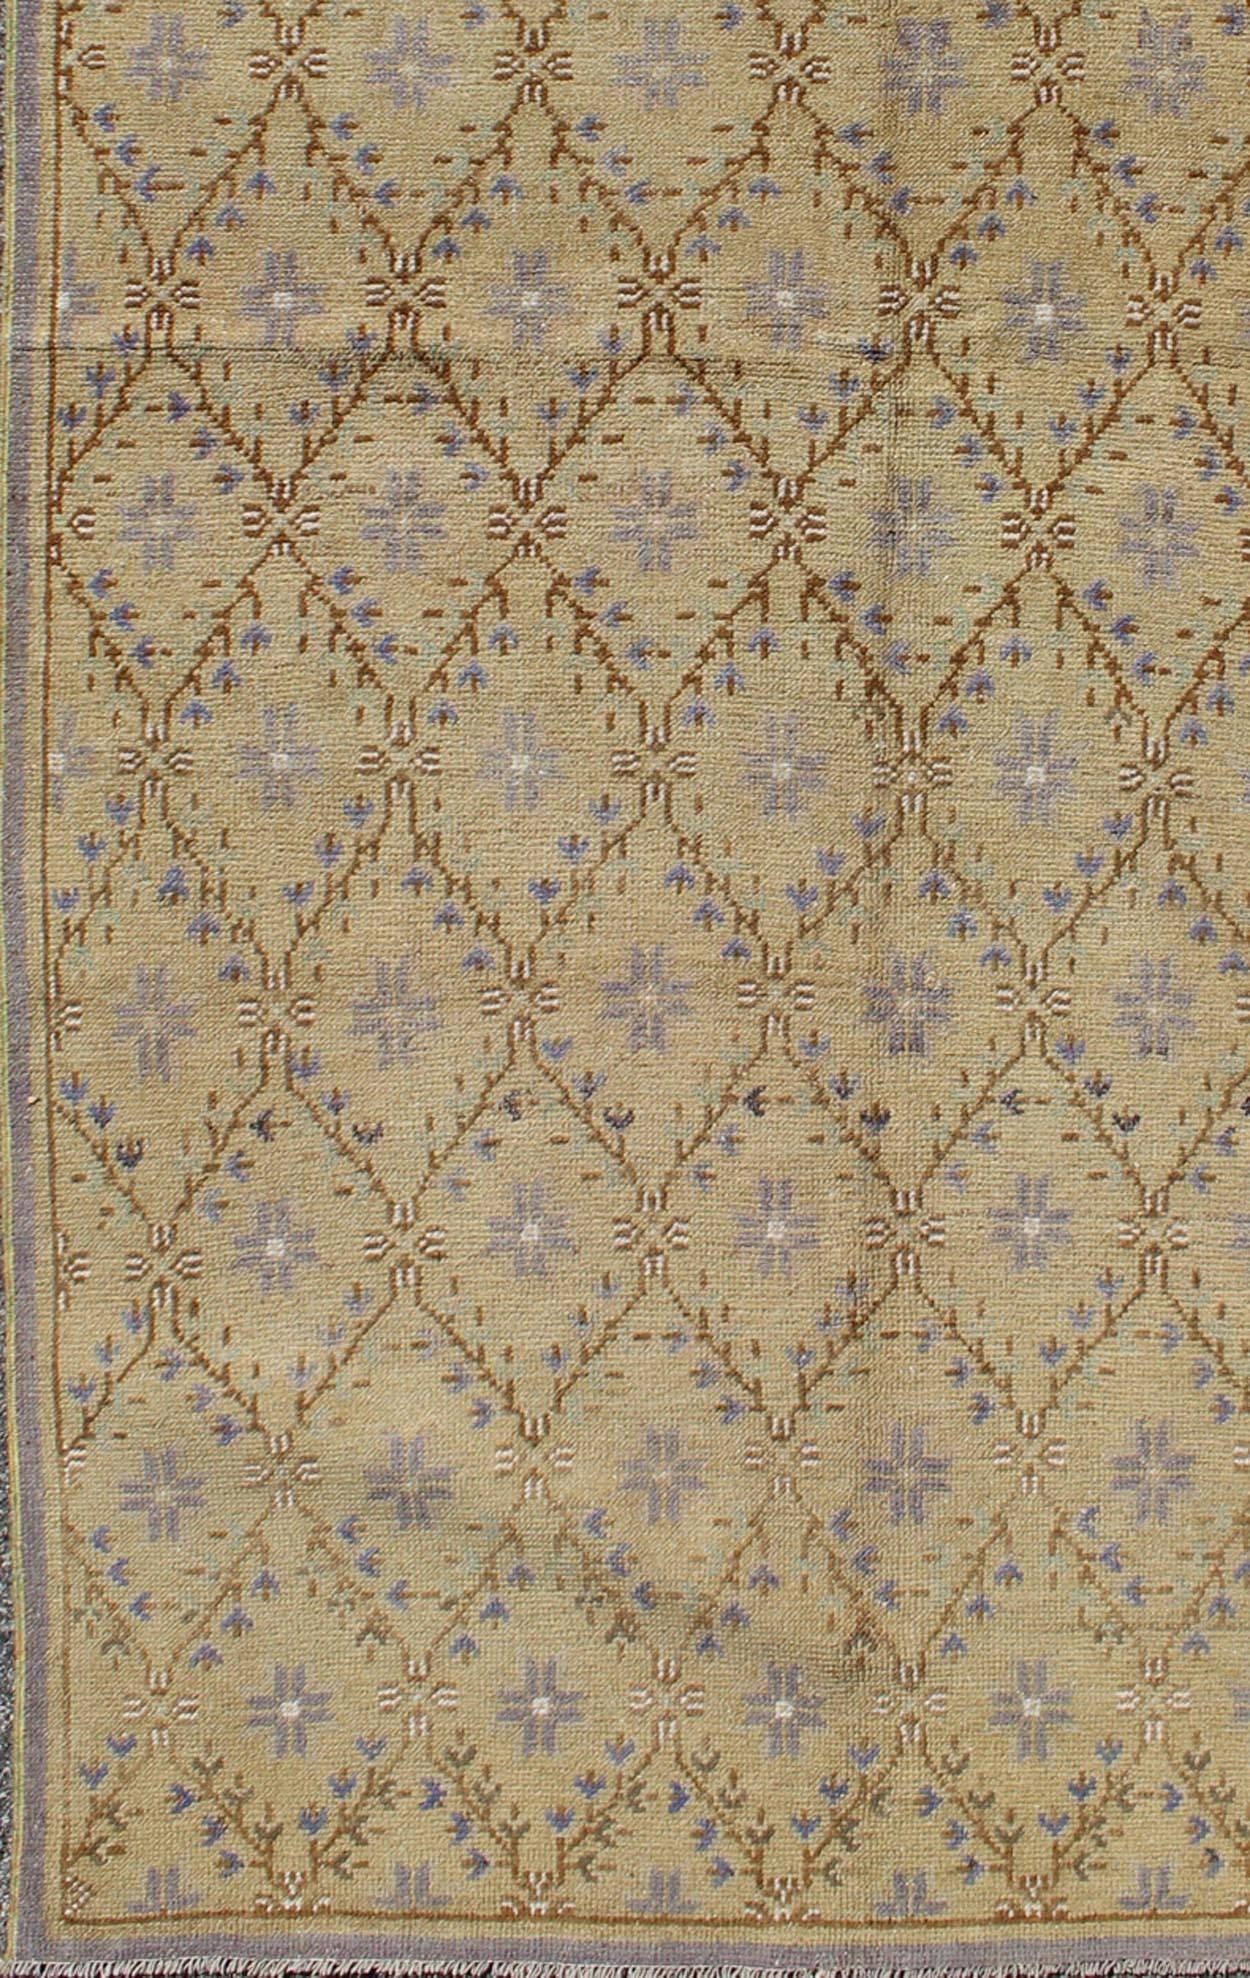 Vintage Turkish Oushak rug with Lattice blossom design in camel and gray colors, rug en-141301, country of origin / type: Turkey / Oushak, circa 1940

Set on a camel-colored field with an all-over pattern, this beautiful mid-century Turkish Oushak